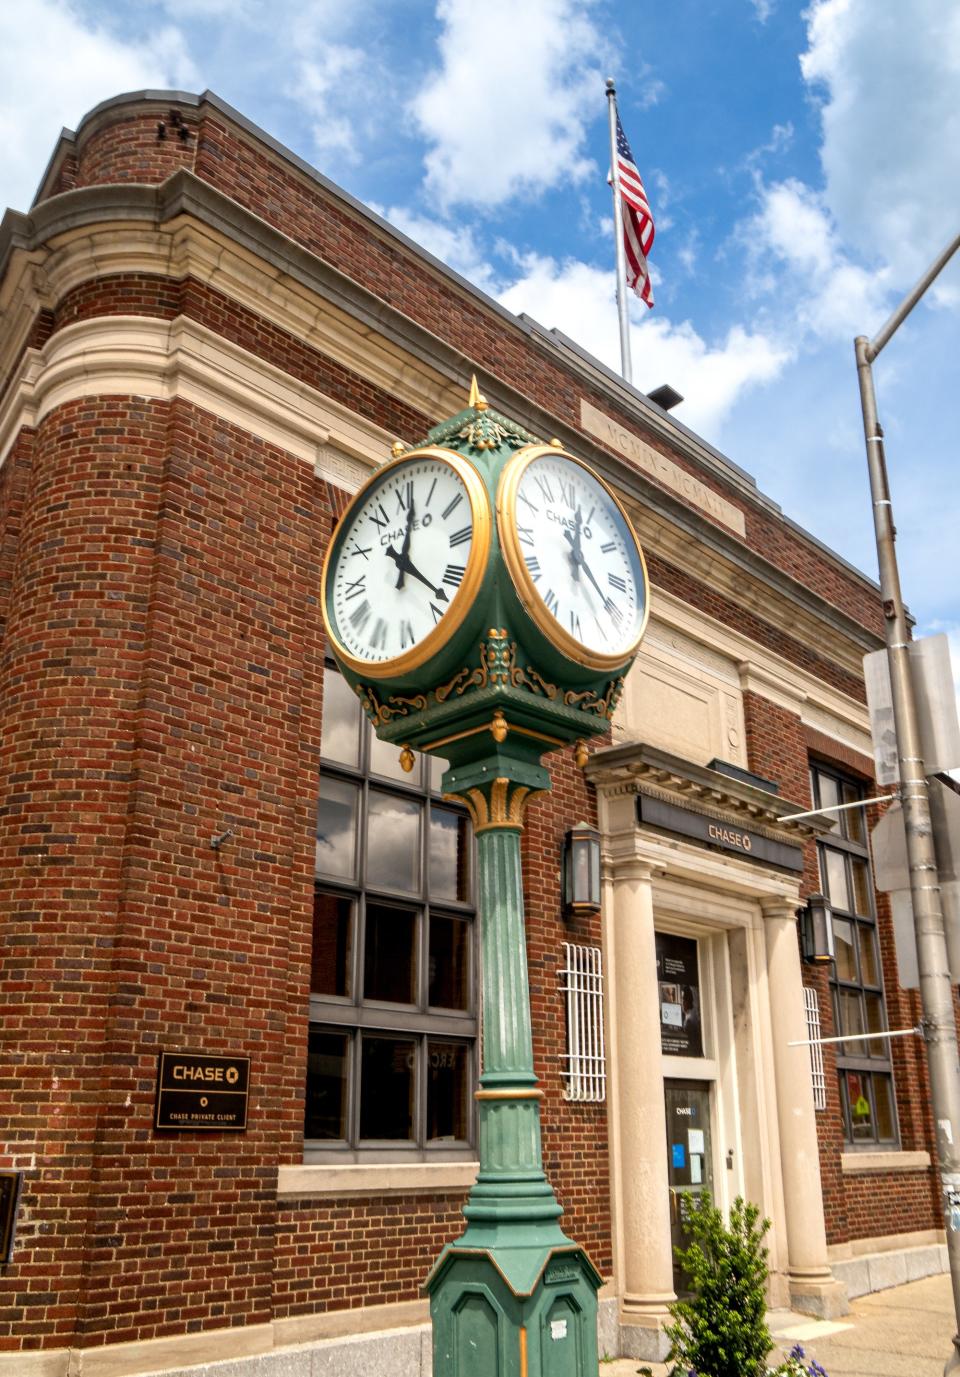 A brick building and corner clock in Montclair, New Jersey